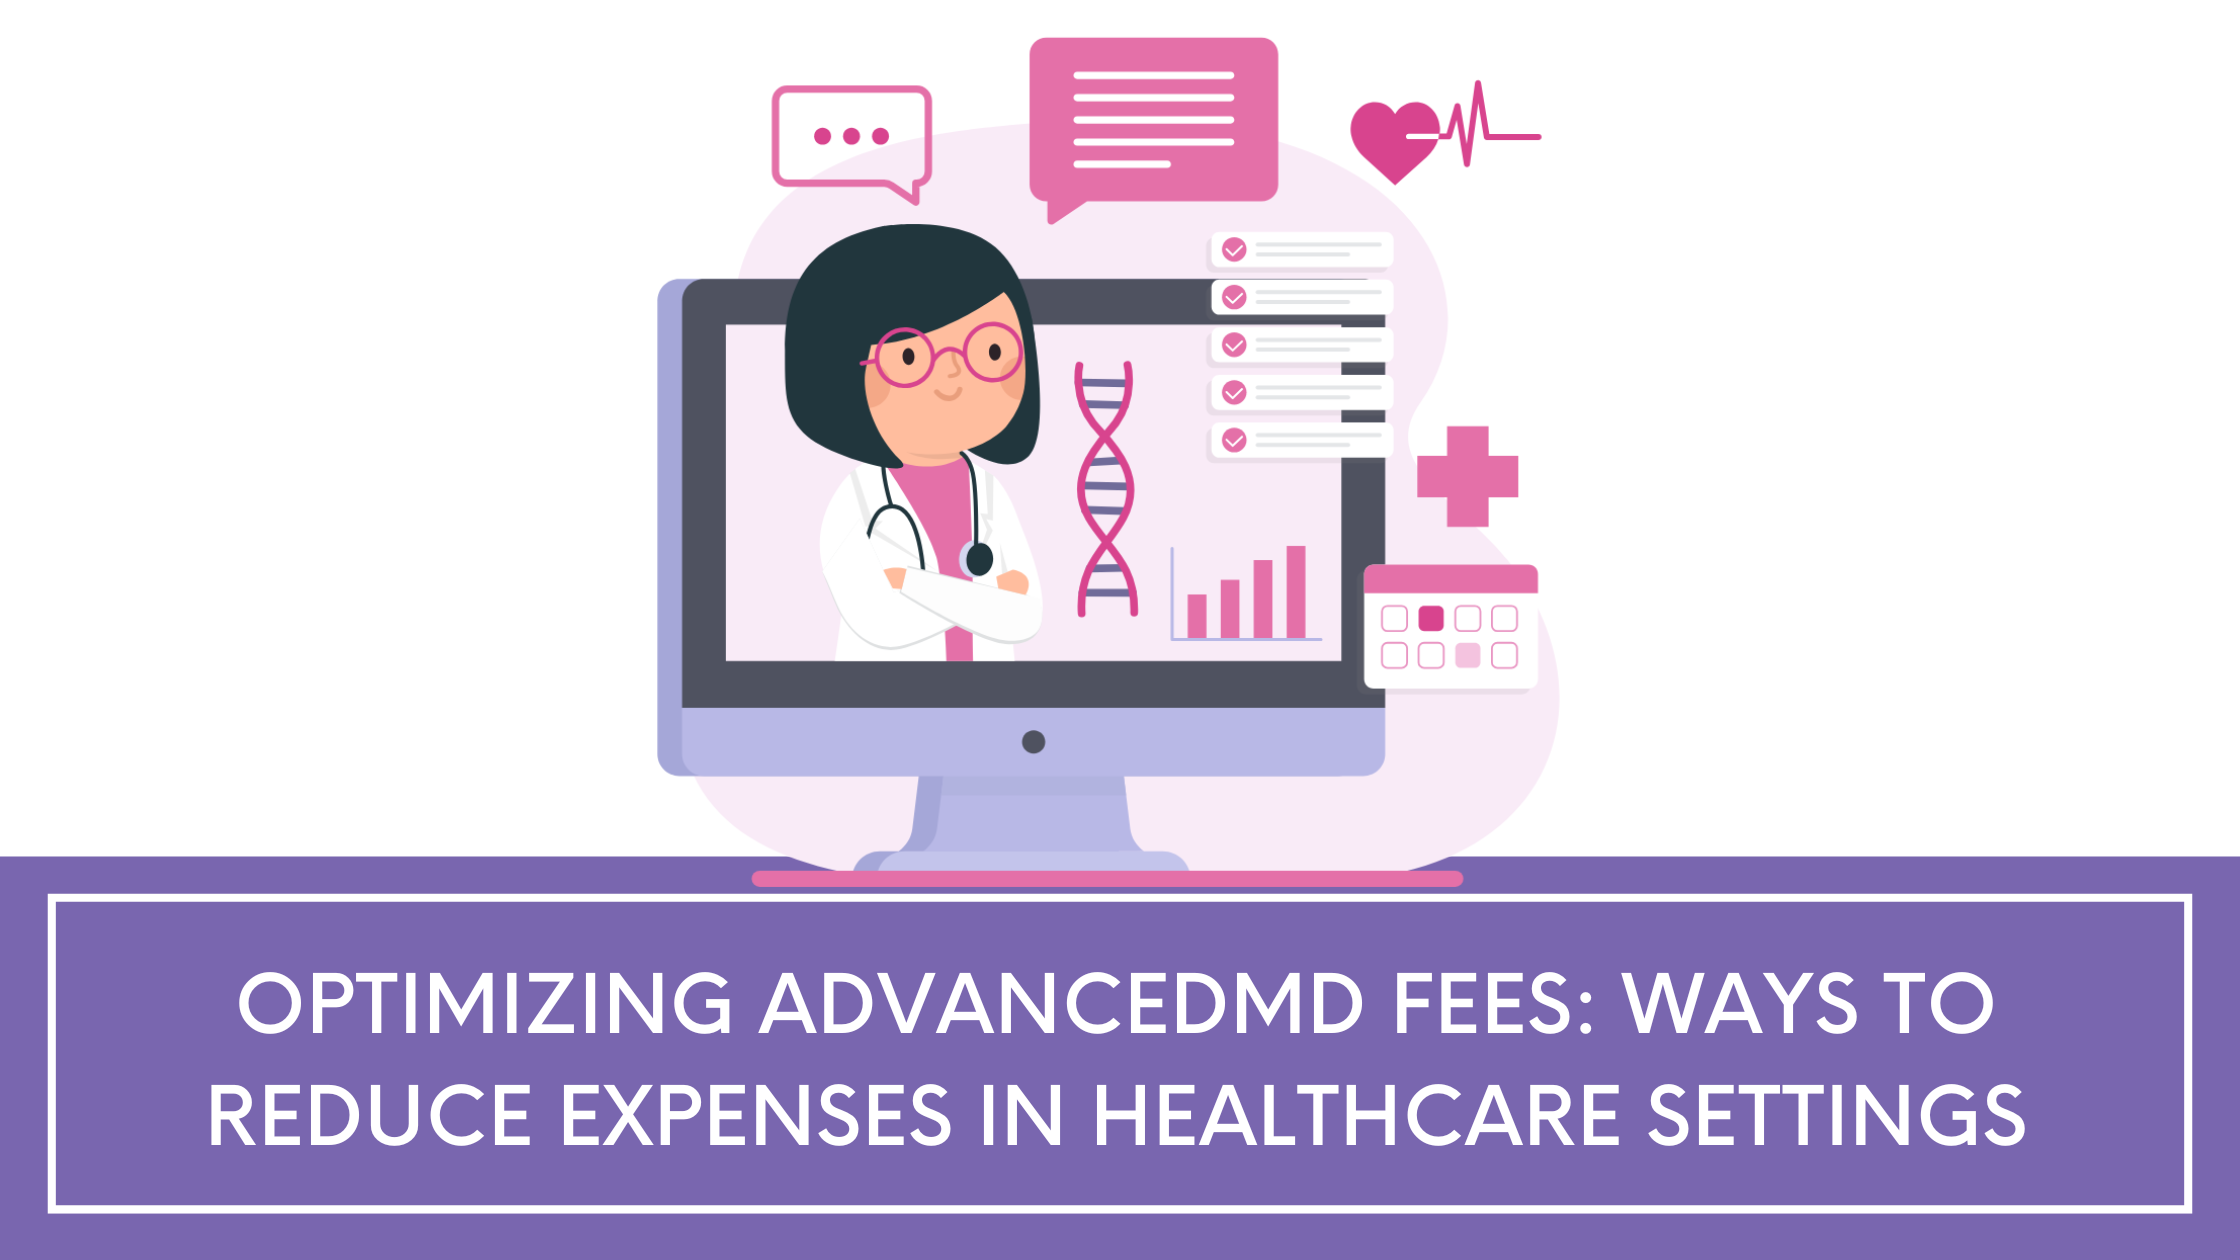 Optimizing AdvancedMD Fees: Ways to Reduce Expenses in Healthcare Settings